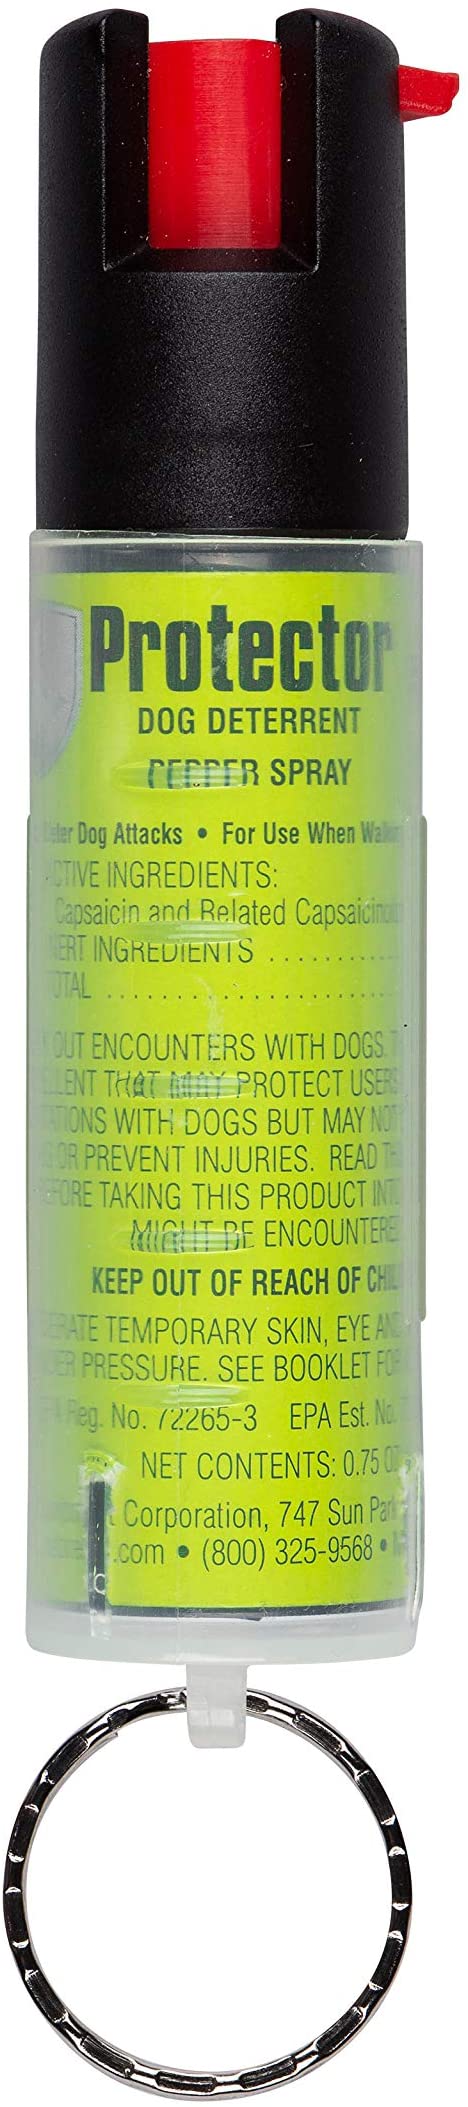 SABRE Dog Spray€”Maximum Strength Protector Pepper Spray Dog Attack Deterrent€”All-Natural and Effective